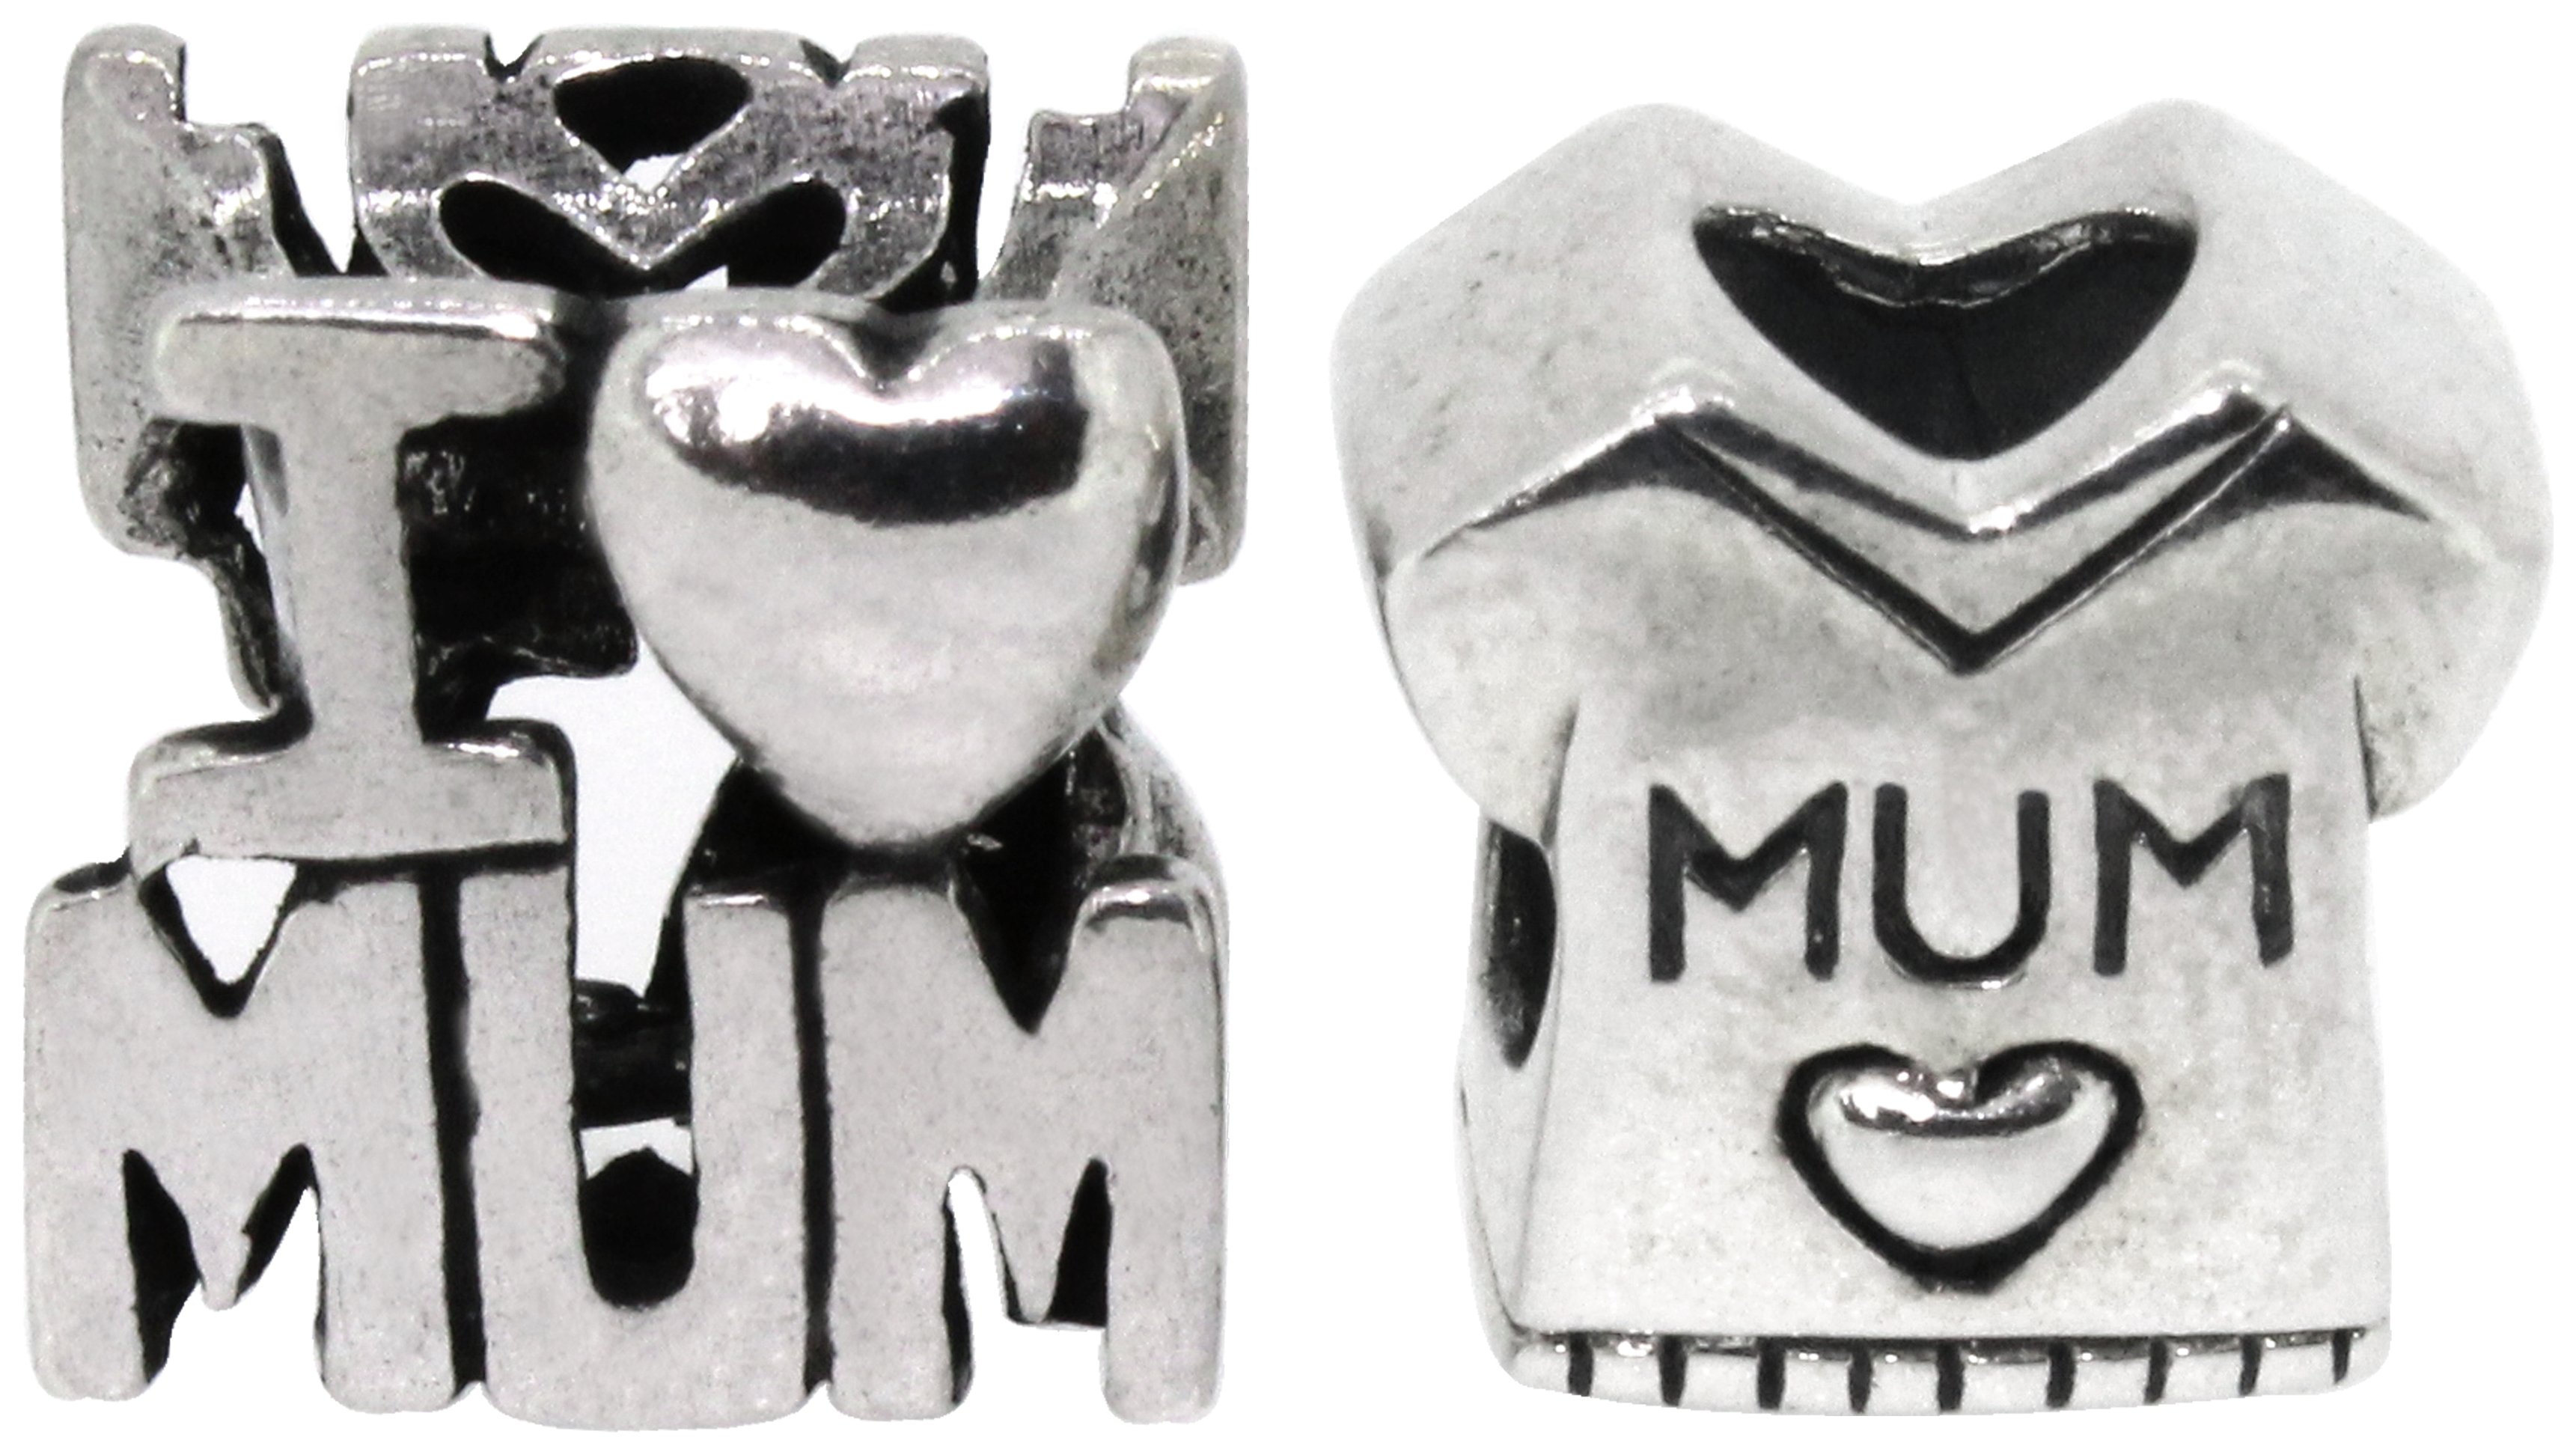 Link Up Sterling Silver No1 Mum Charms - Set of 2.